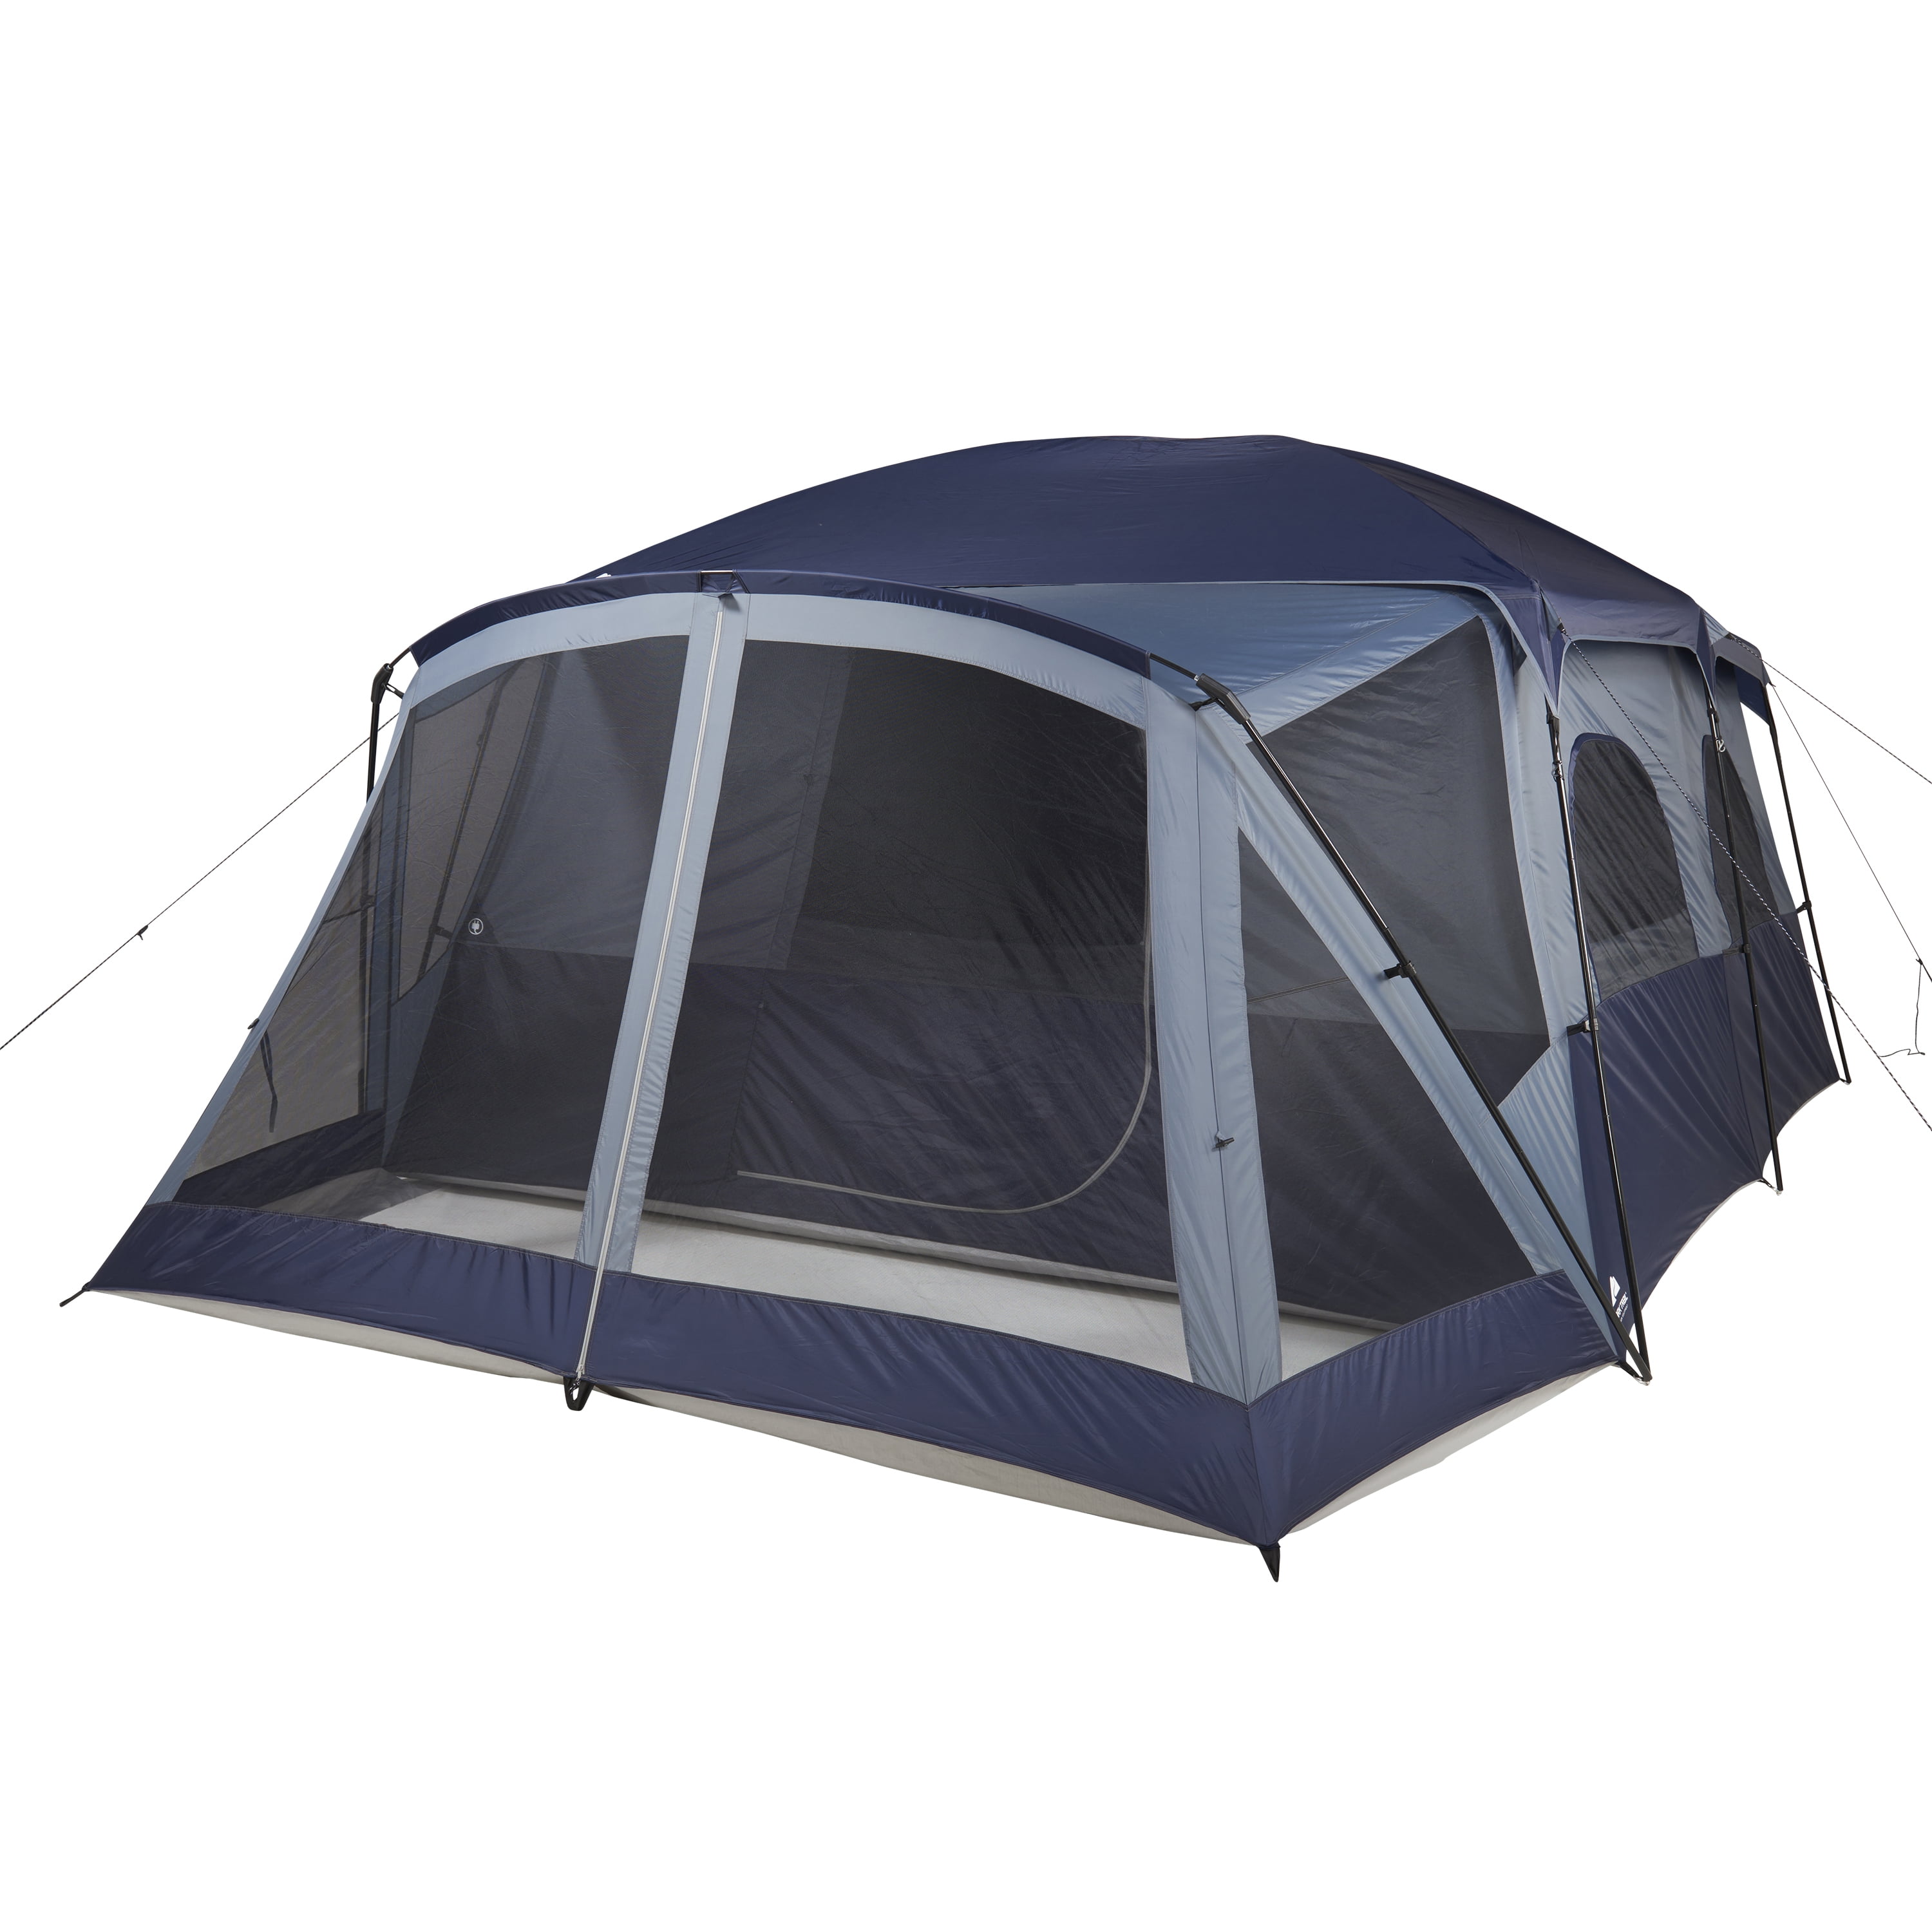 with Screen Porch and 2 Entrances Ozark Trail 12-Person Cabin Tent 